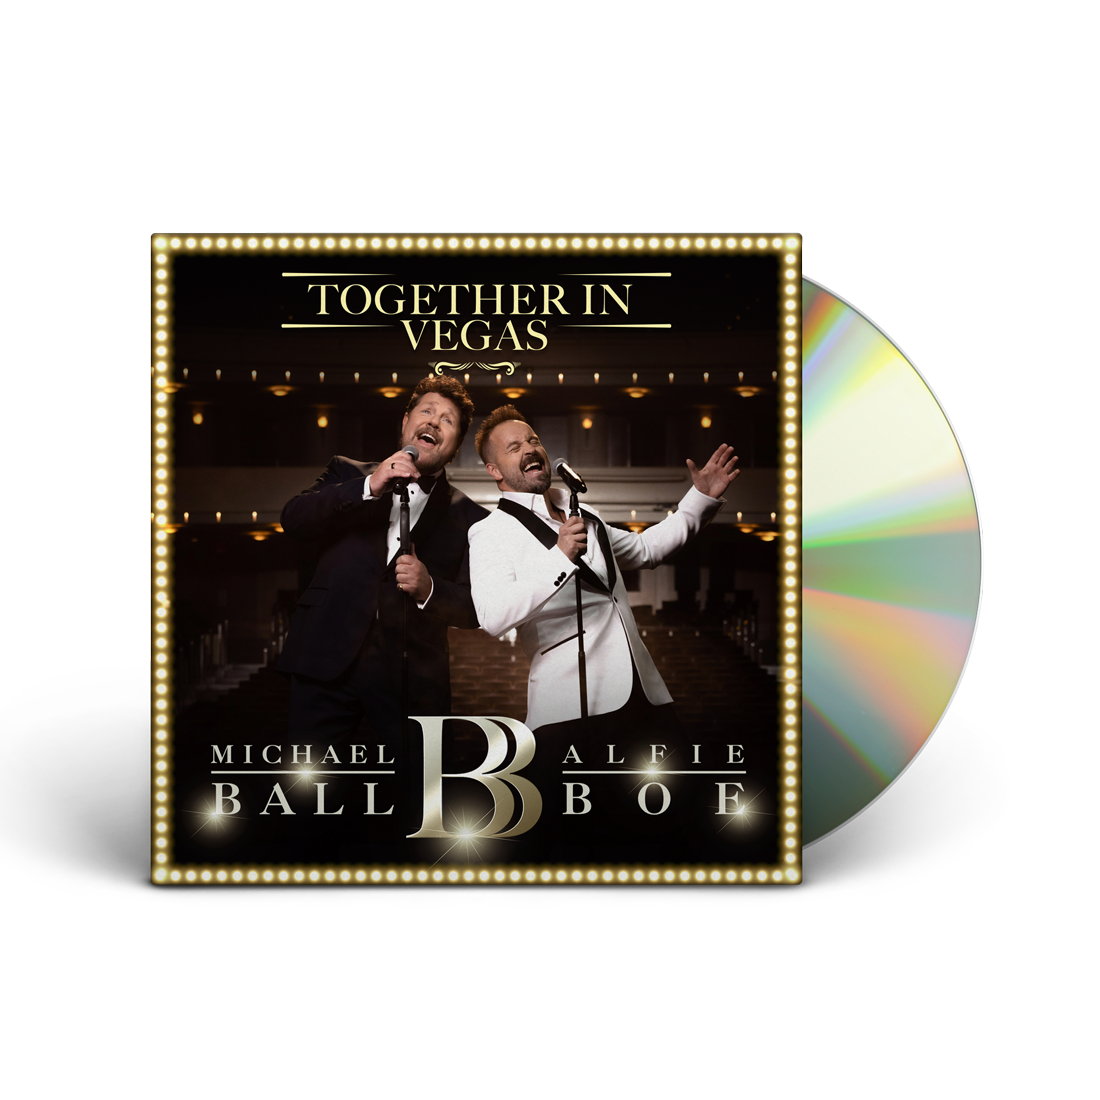 Michael Ball, Alfie Boe - Together in Vegas: Signed CD